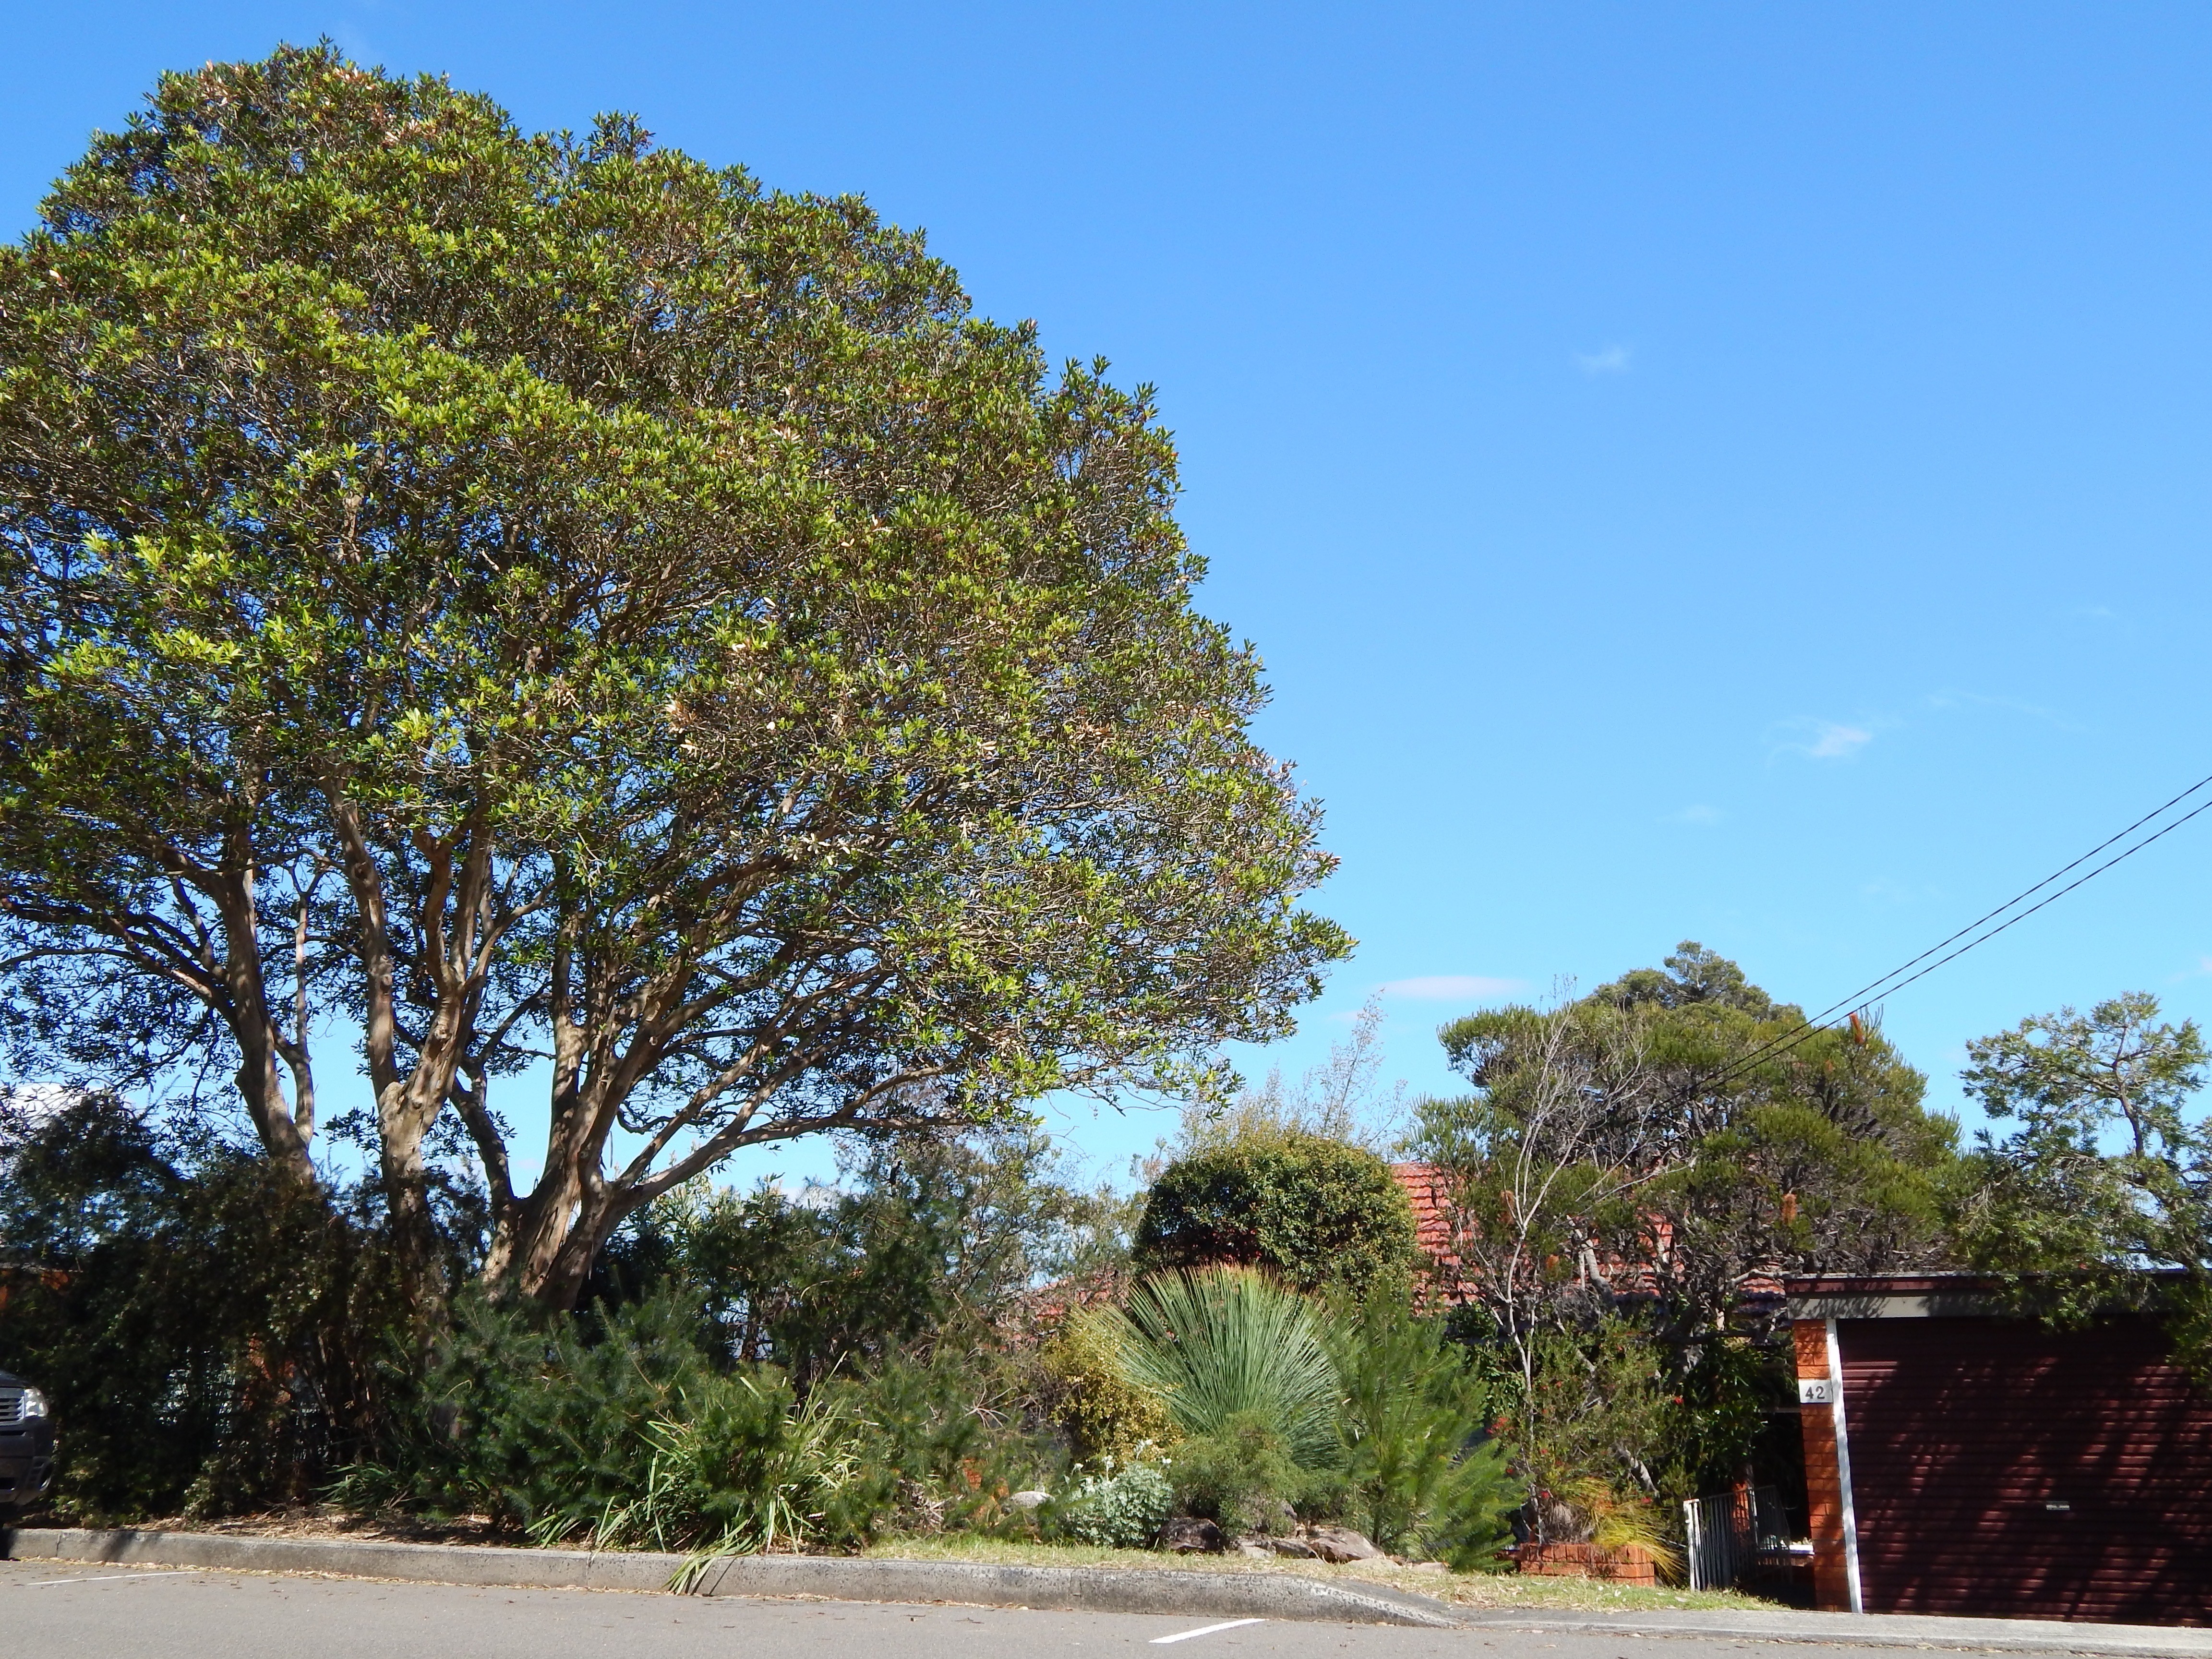 Suburban street with a tall eucalypt surrounded by shrubs